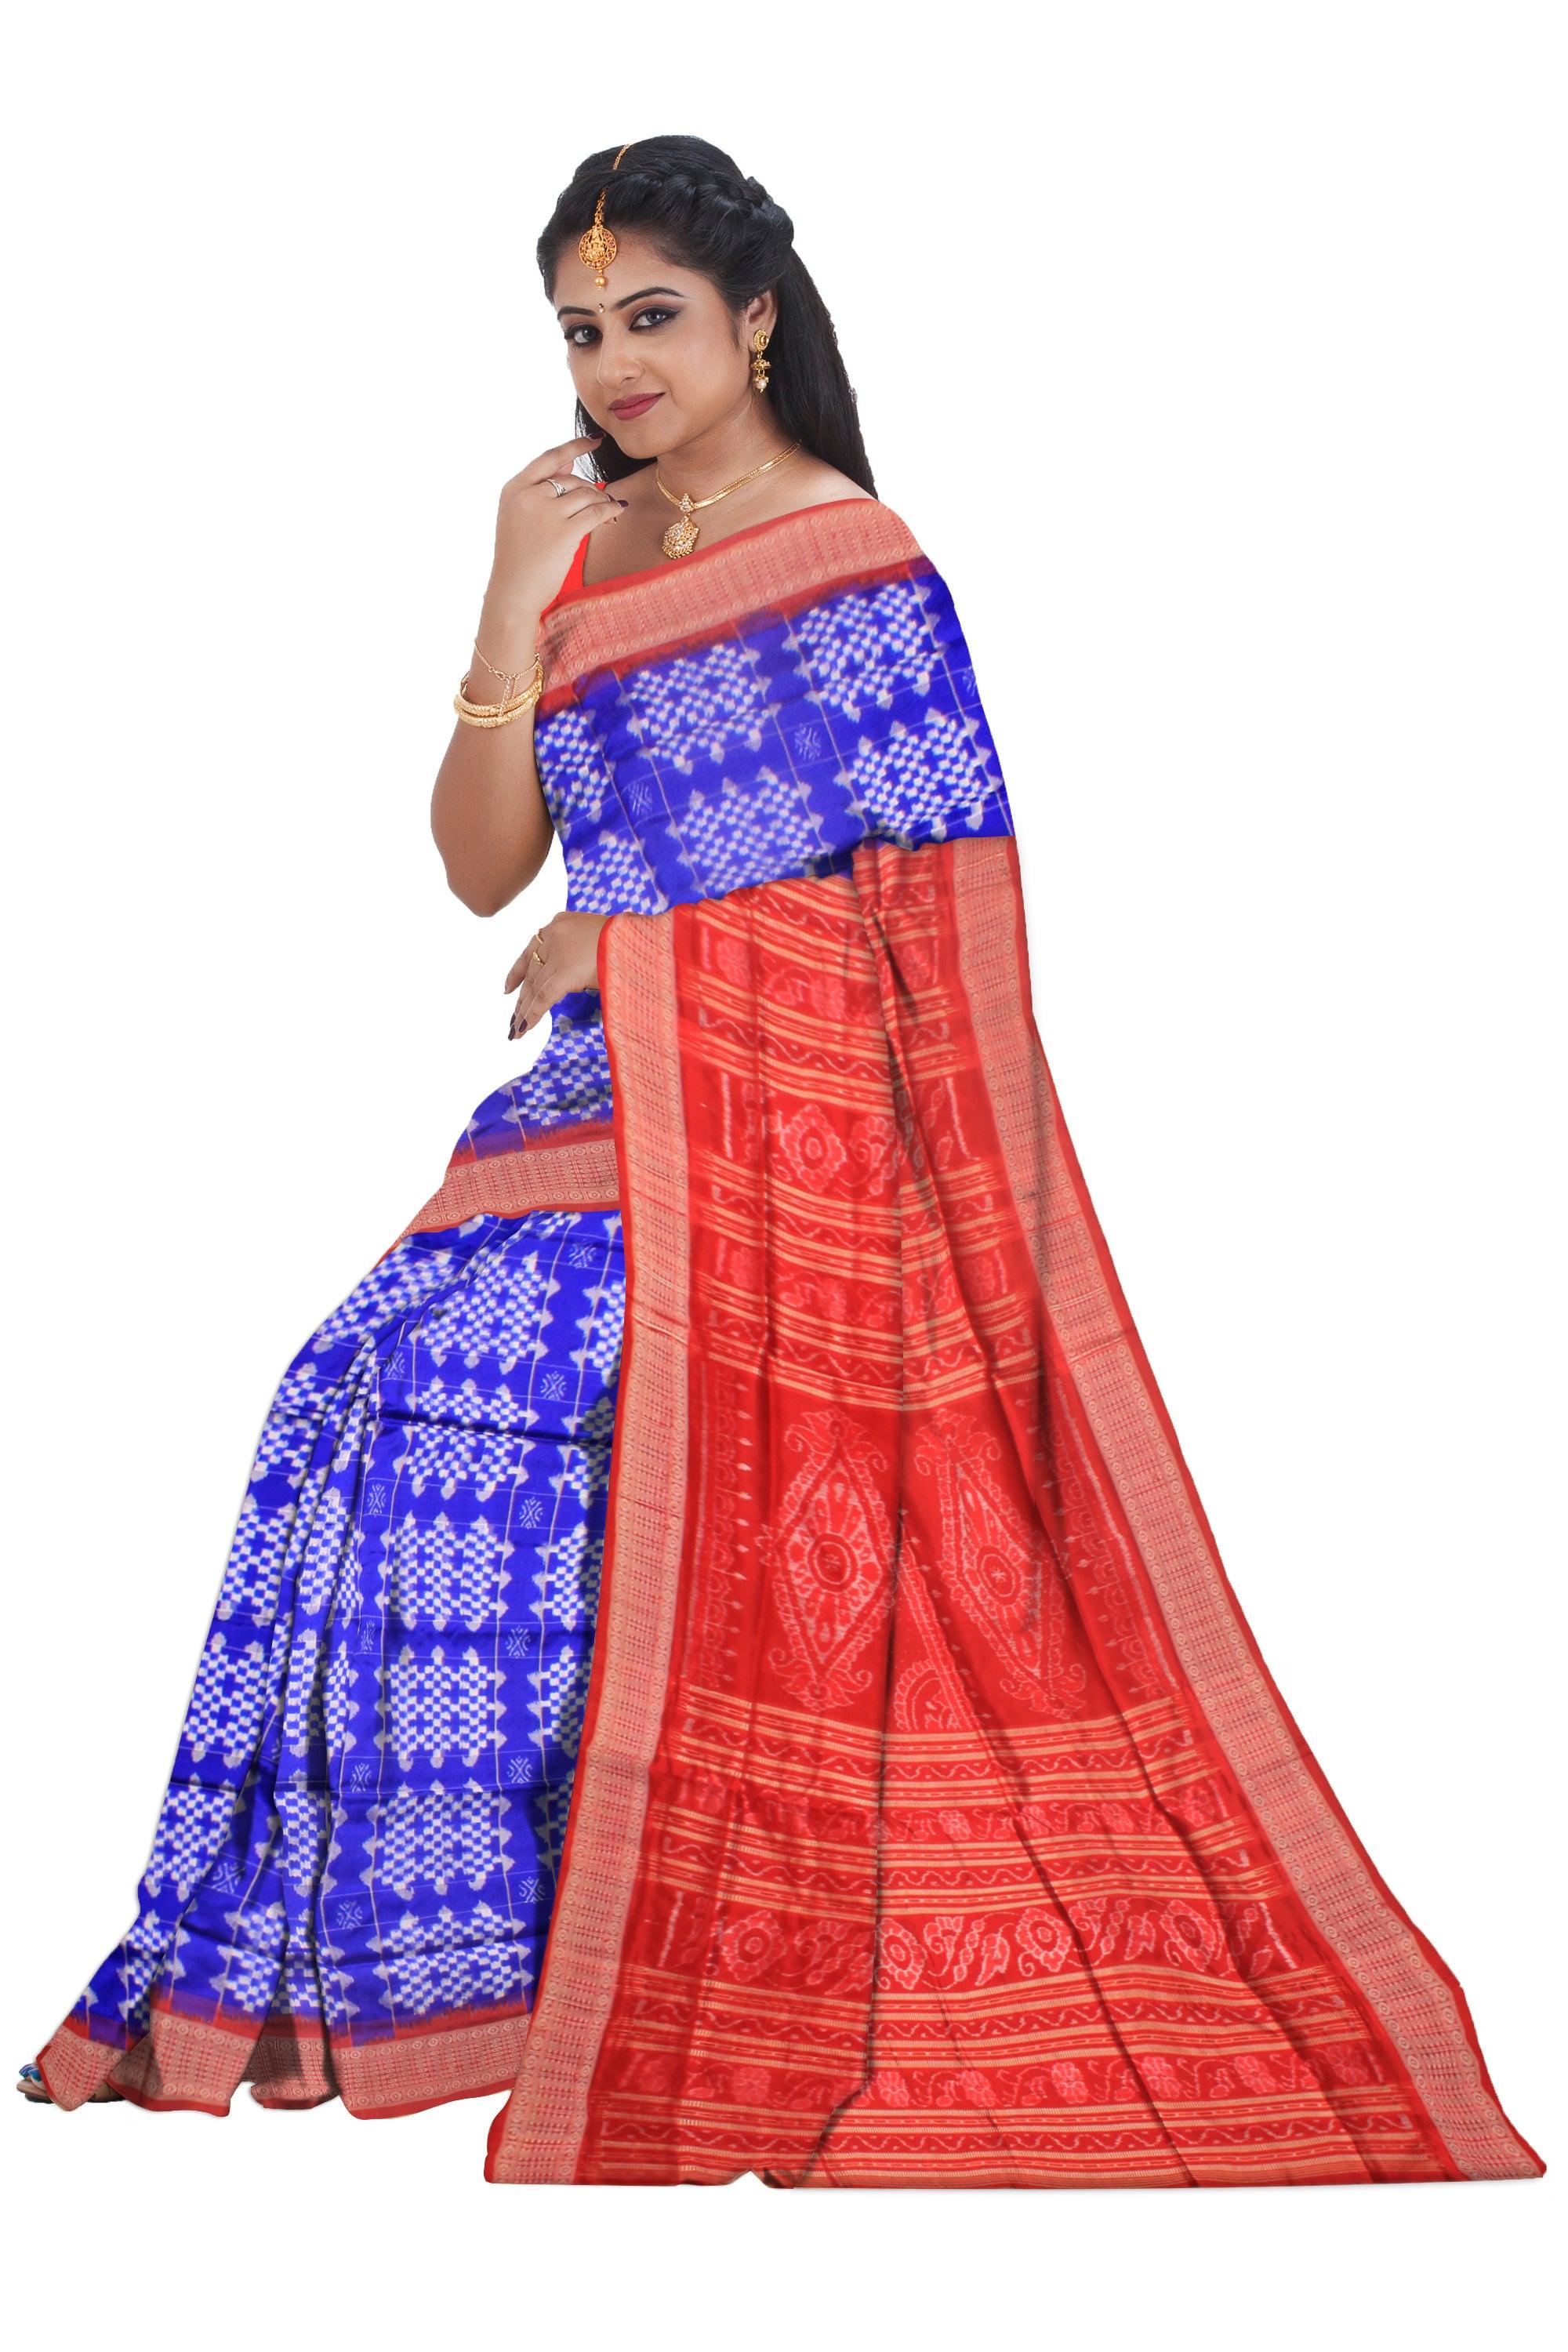 Handwoven Sonepur silk saree in blue base traditional small pasapalli ikat in body.  With  blouse piece. - Koshali Arts & Crafts Enterprise